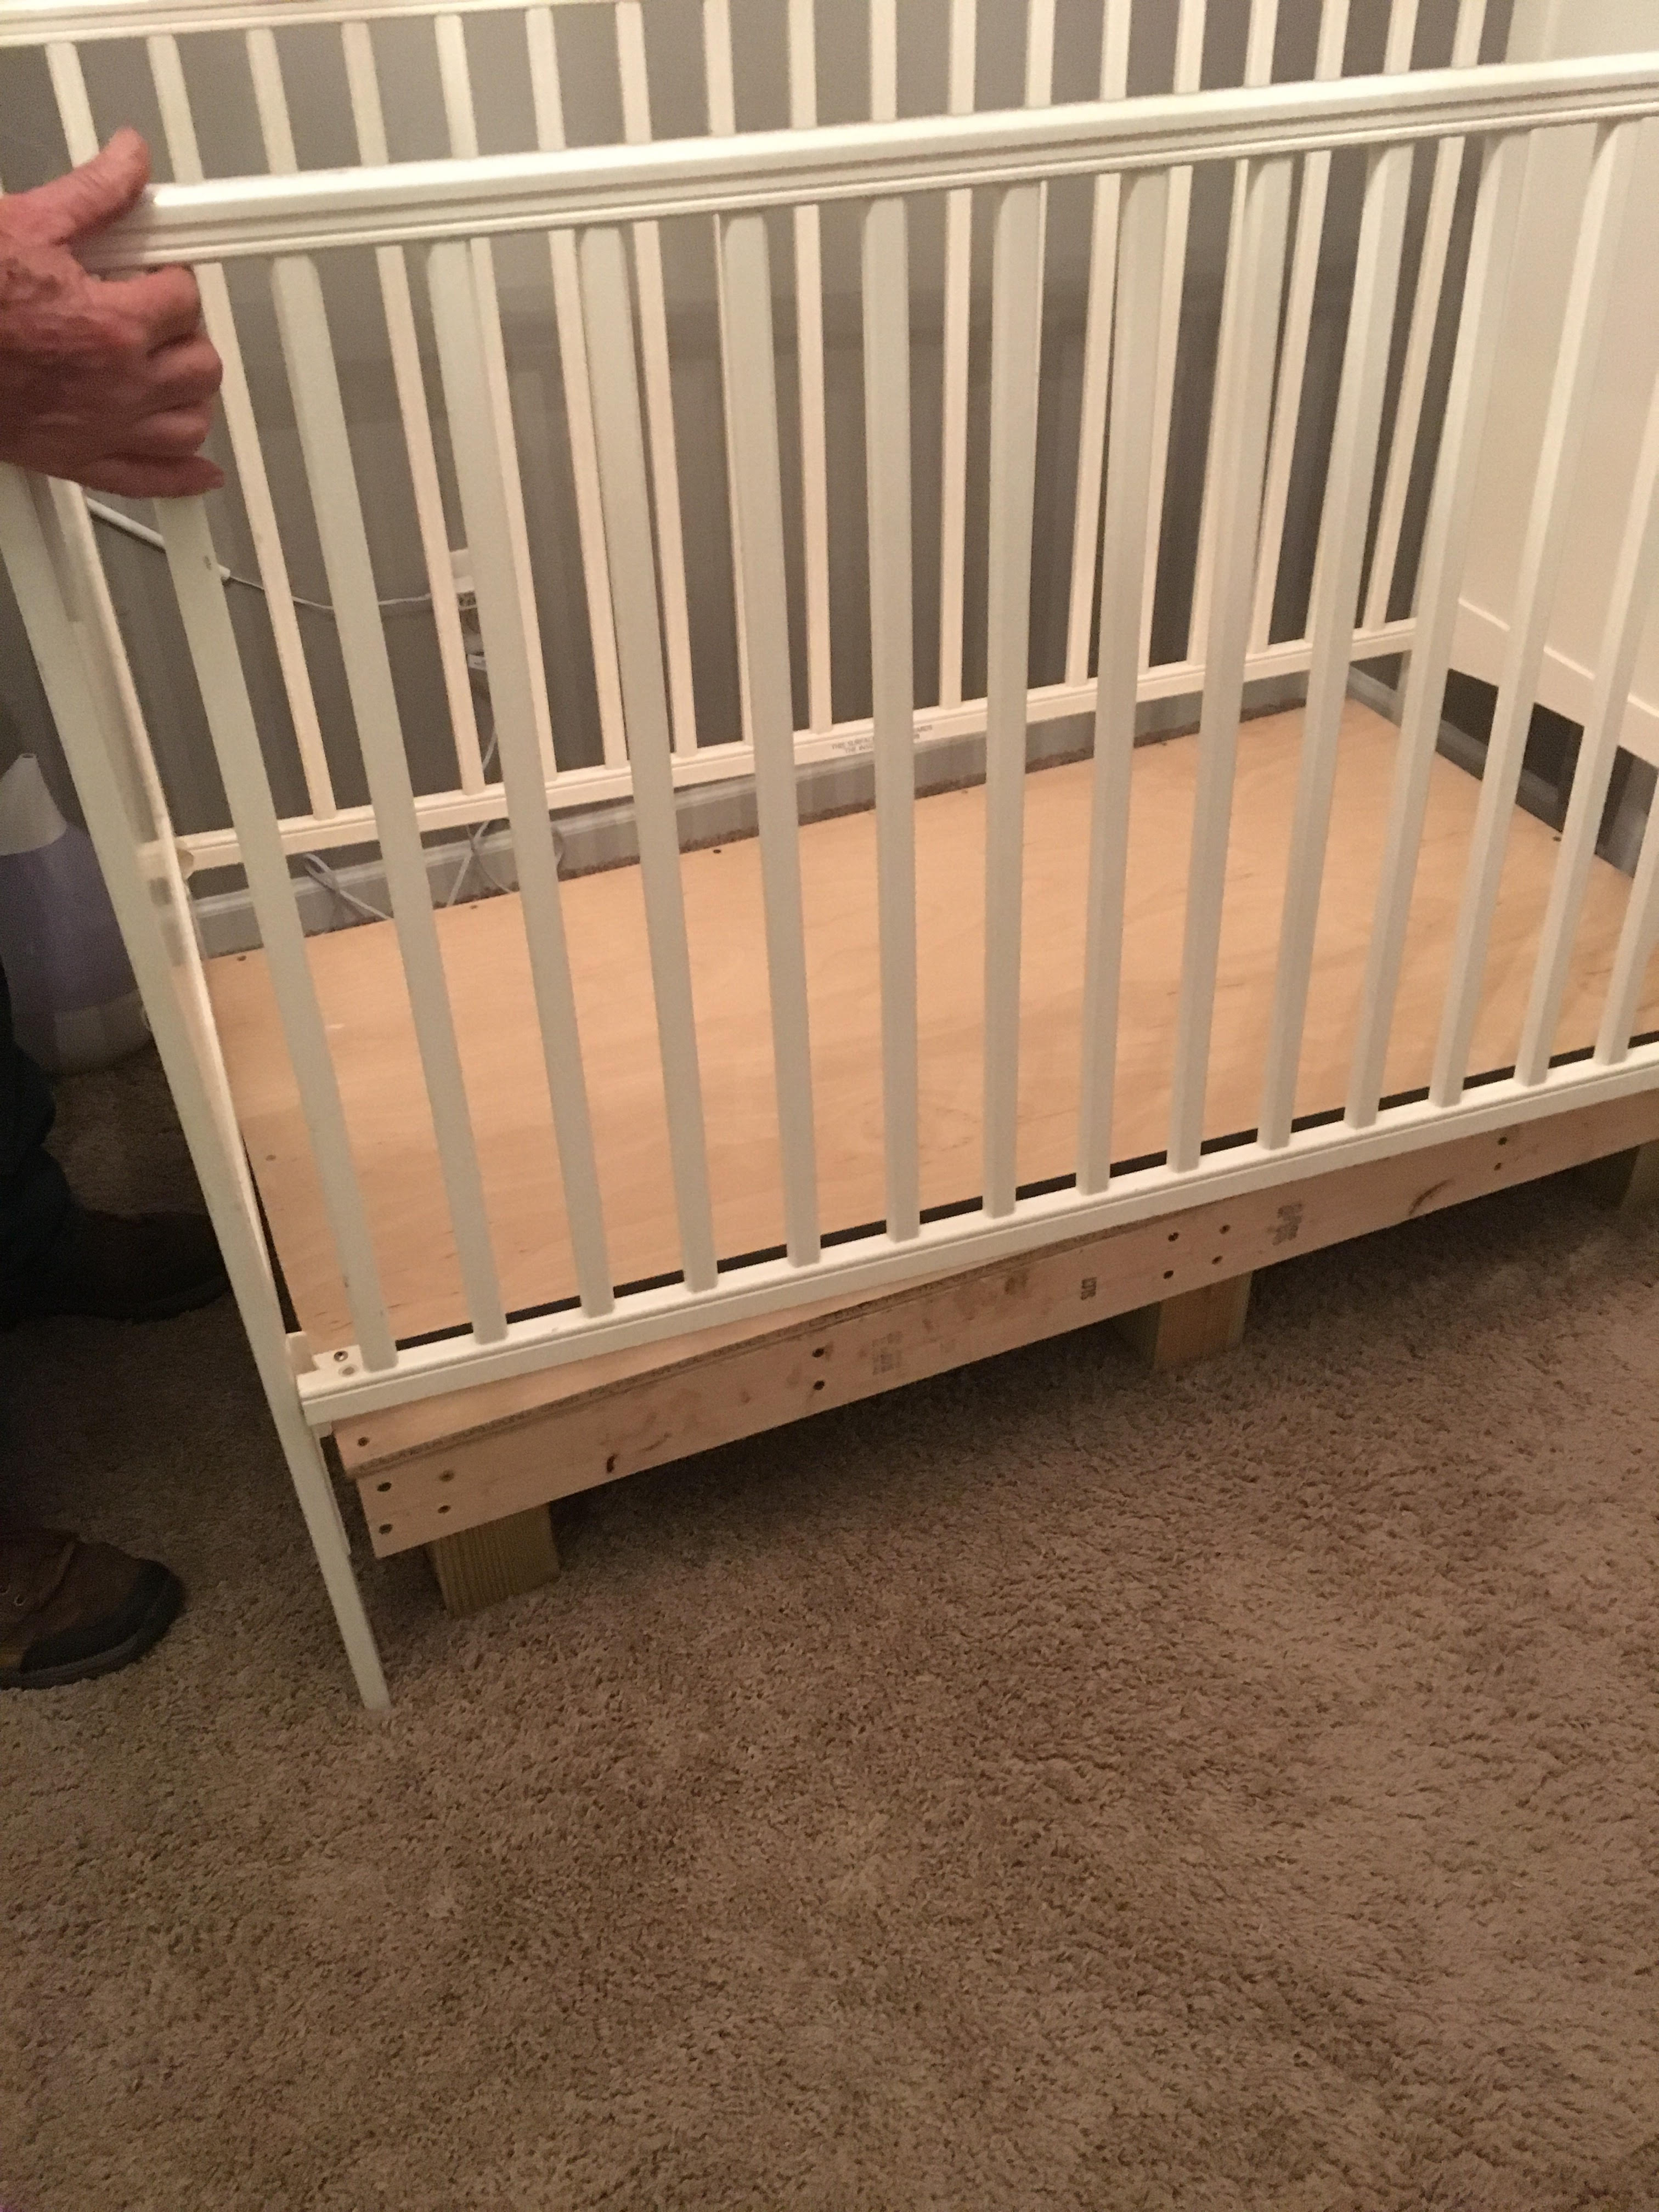 Instructions for Building an Easy Crib Platform